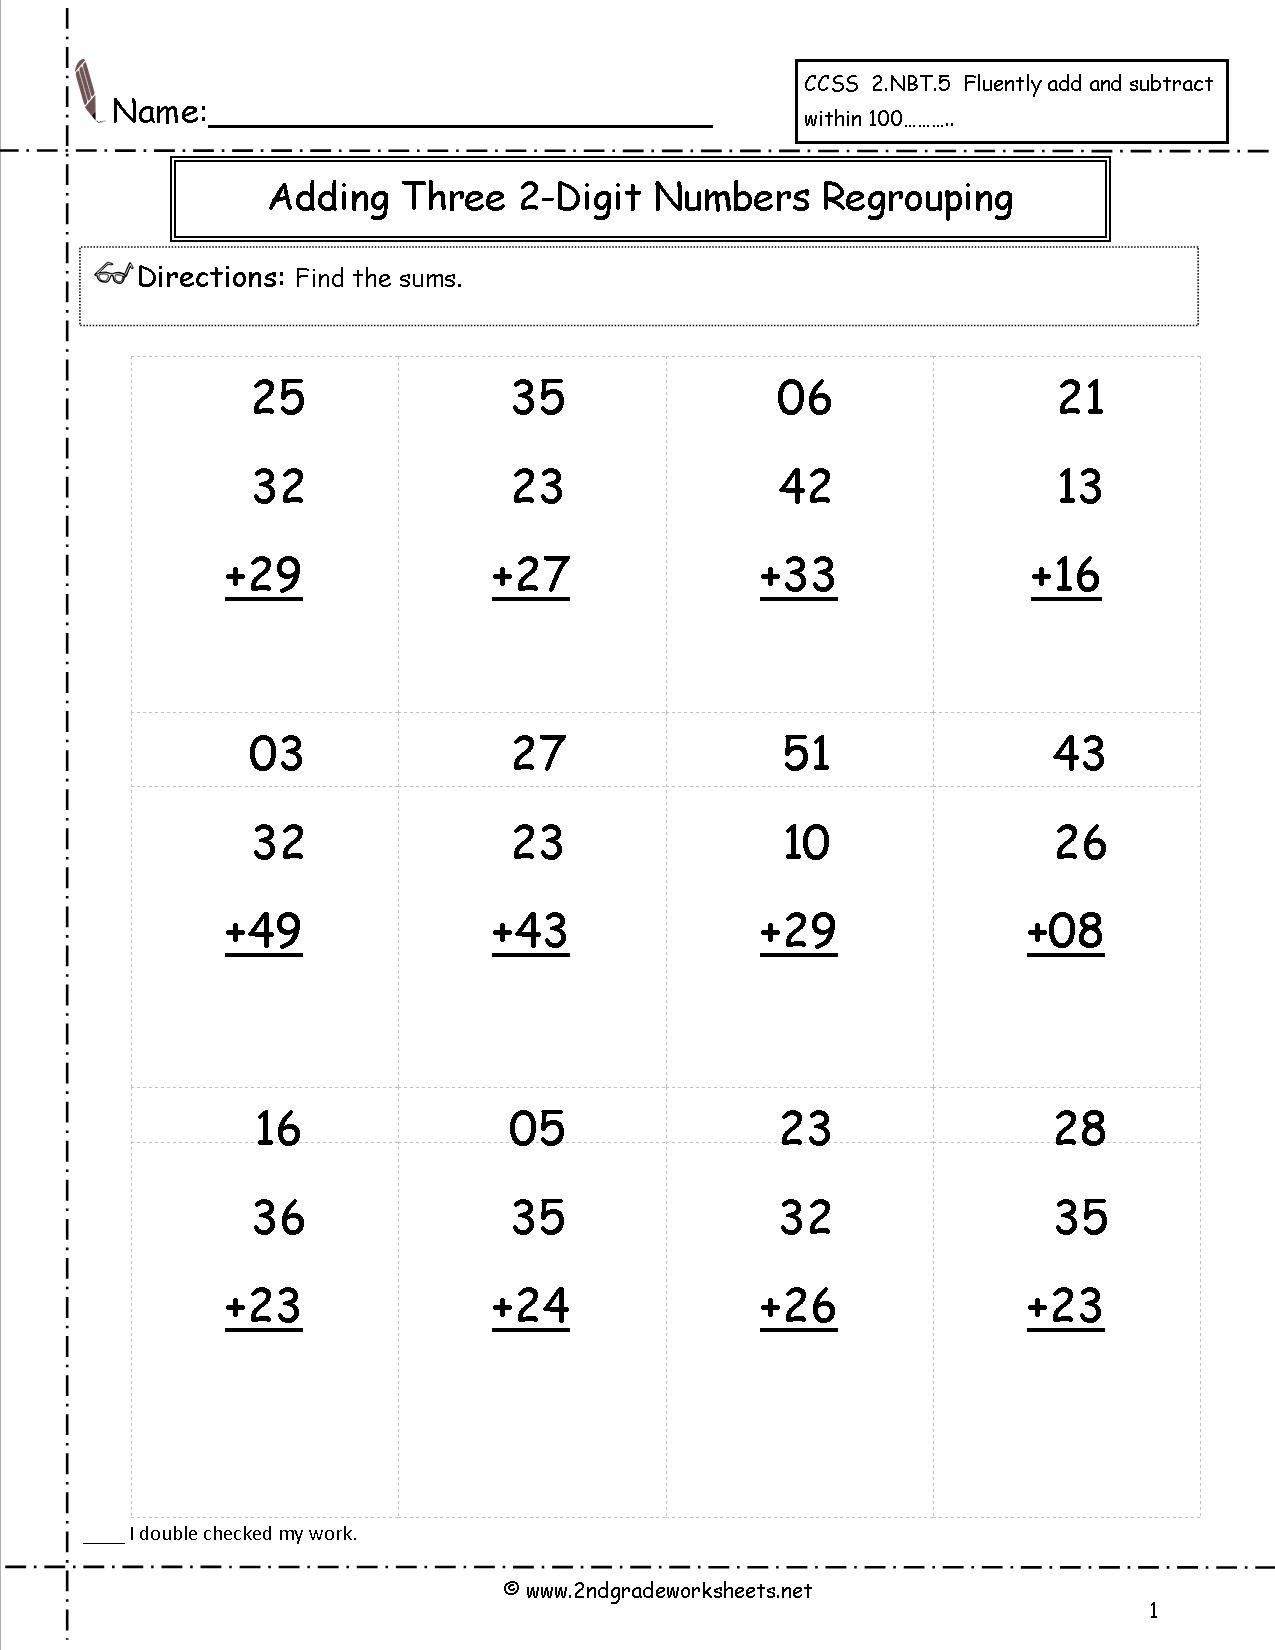 Adding Two Digit Numbers with Regrouping Worksheet Image